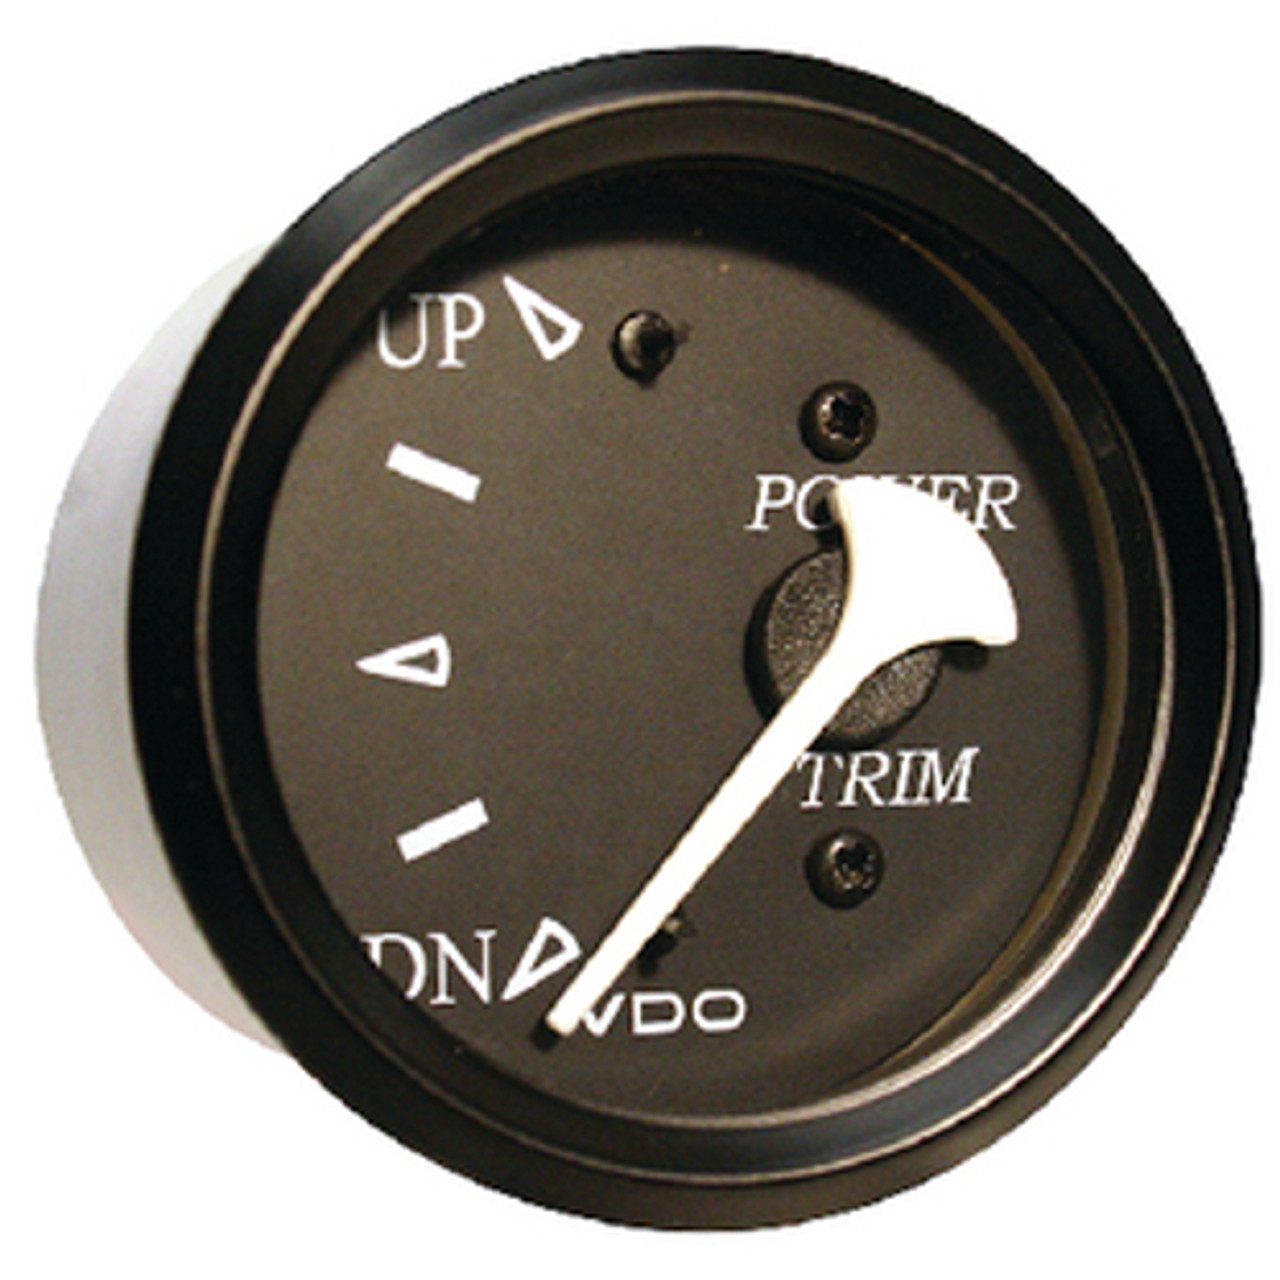 Black Faced Johnson and Evinrude Outboard Trim Gauge with Black Bezel for Boats